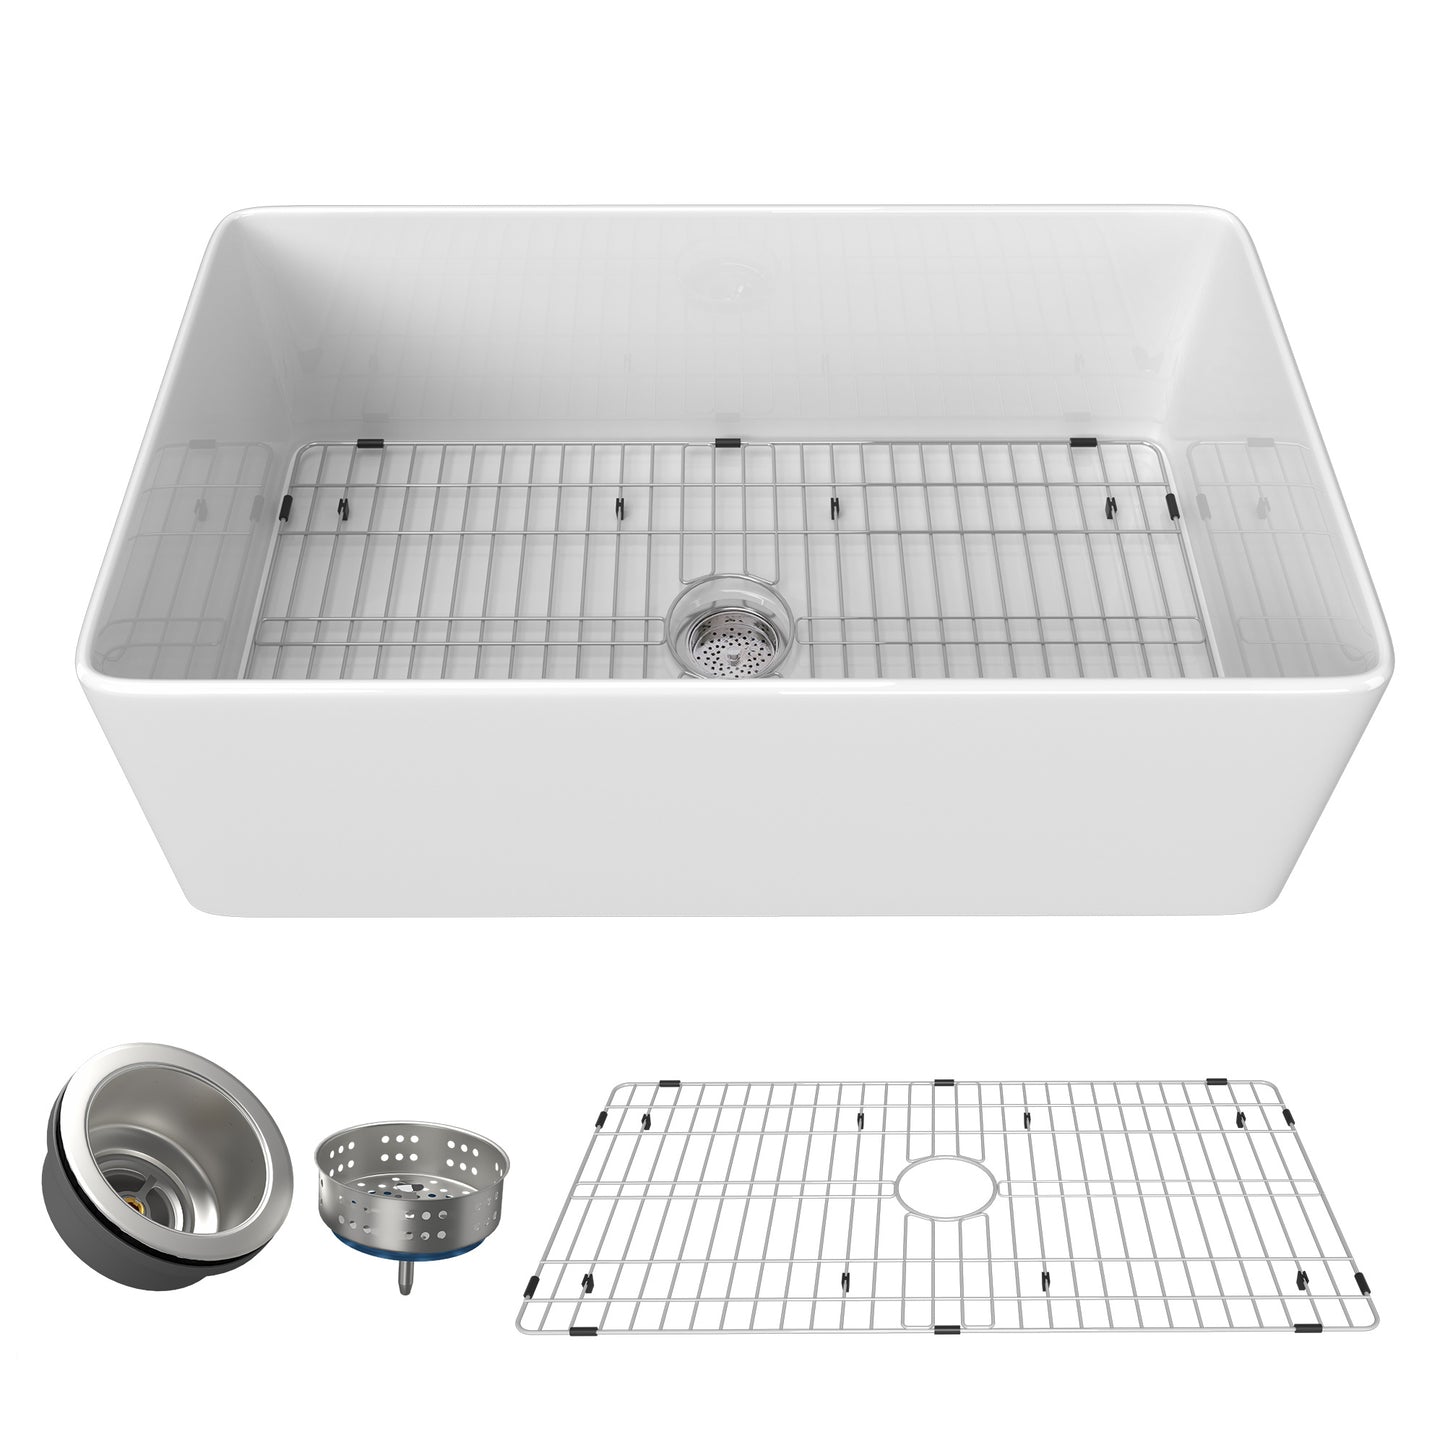 36 Inch Fireclay Farmhouse Kitchen Sink White Single Bowl Apron Front Kitchen Sink, Bottom Grid and Kitchen Sink Drain Included